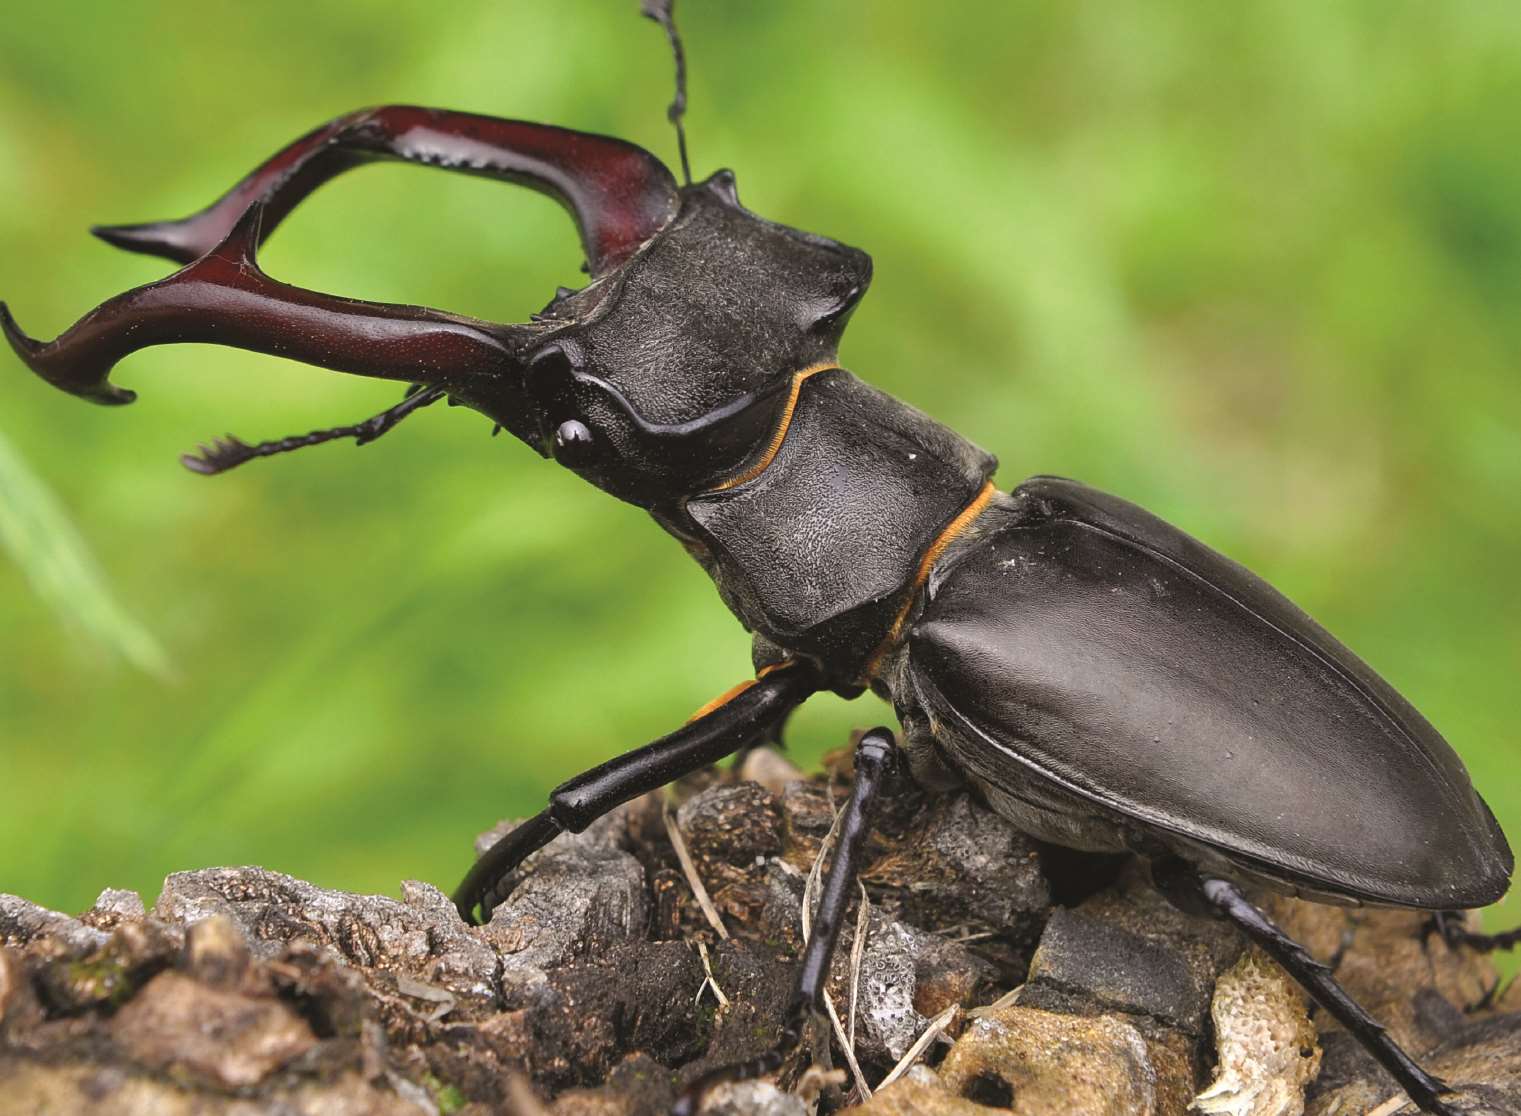 A colony of stag beetles has been discovered in Canterbury